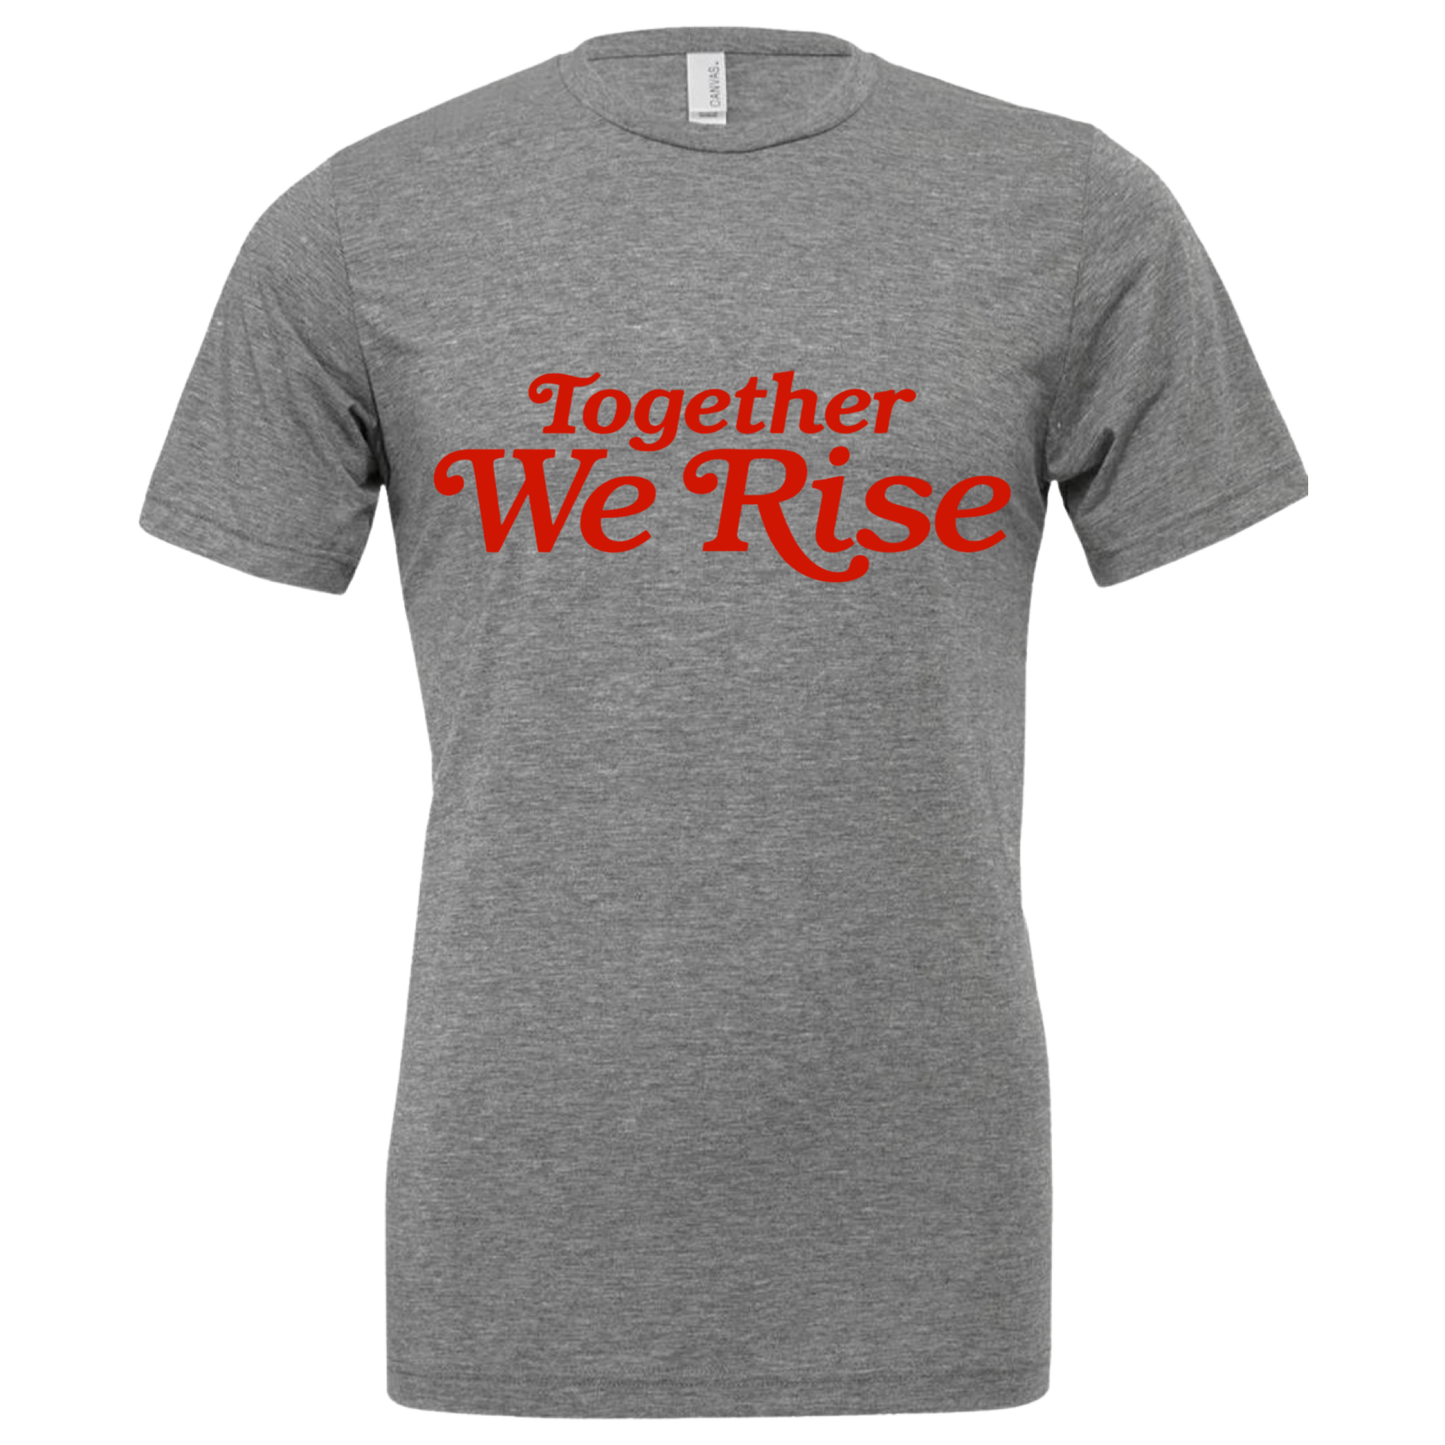 Together We Rise Adult Tee Grey